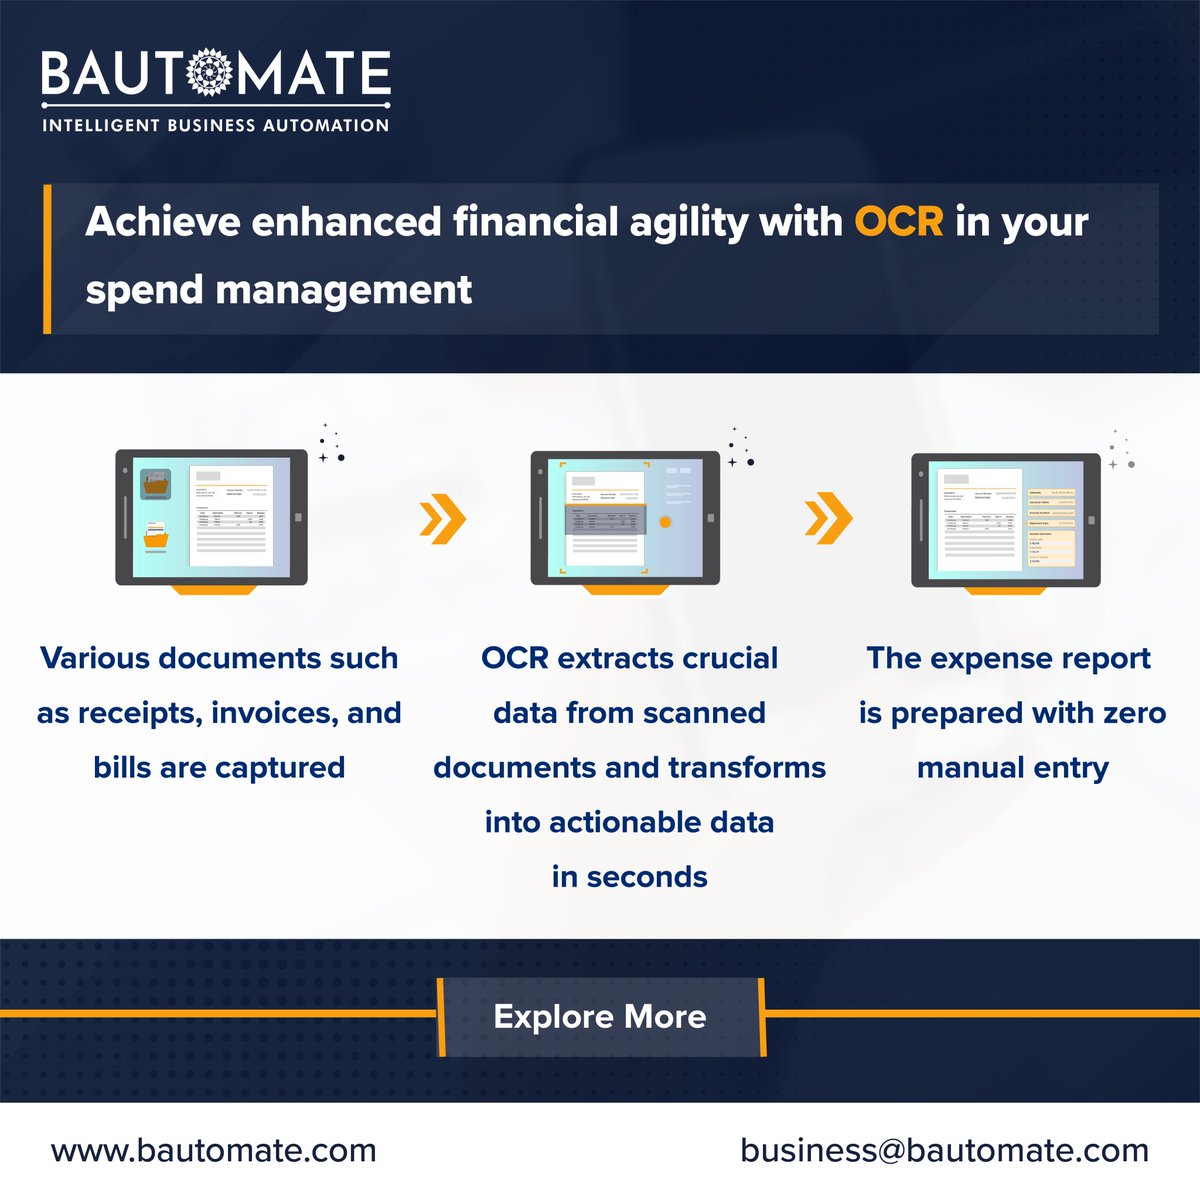 Unlock Strong Financial Health with OCR in Your Spend Management! 
Gain real-time insights, reduce errors, and drive your organization's financial health to new heights. Contact us to explore more - bautomate.com/ocr-software/ 

#OCR #cognition #spendmanagement #spendanalysis